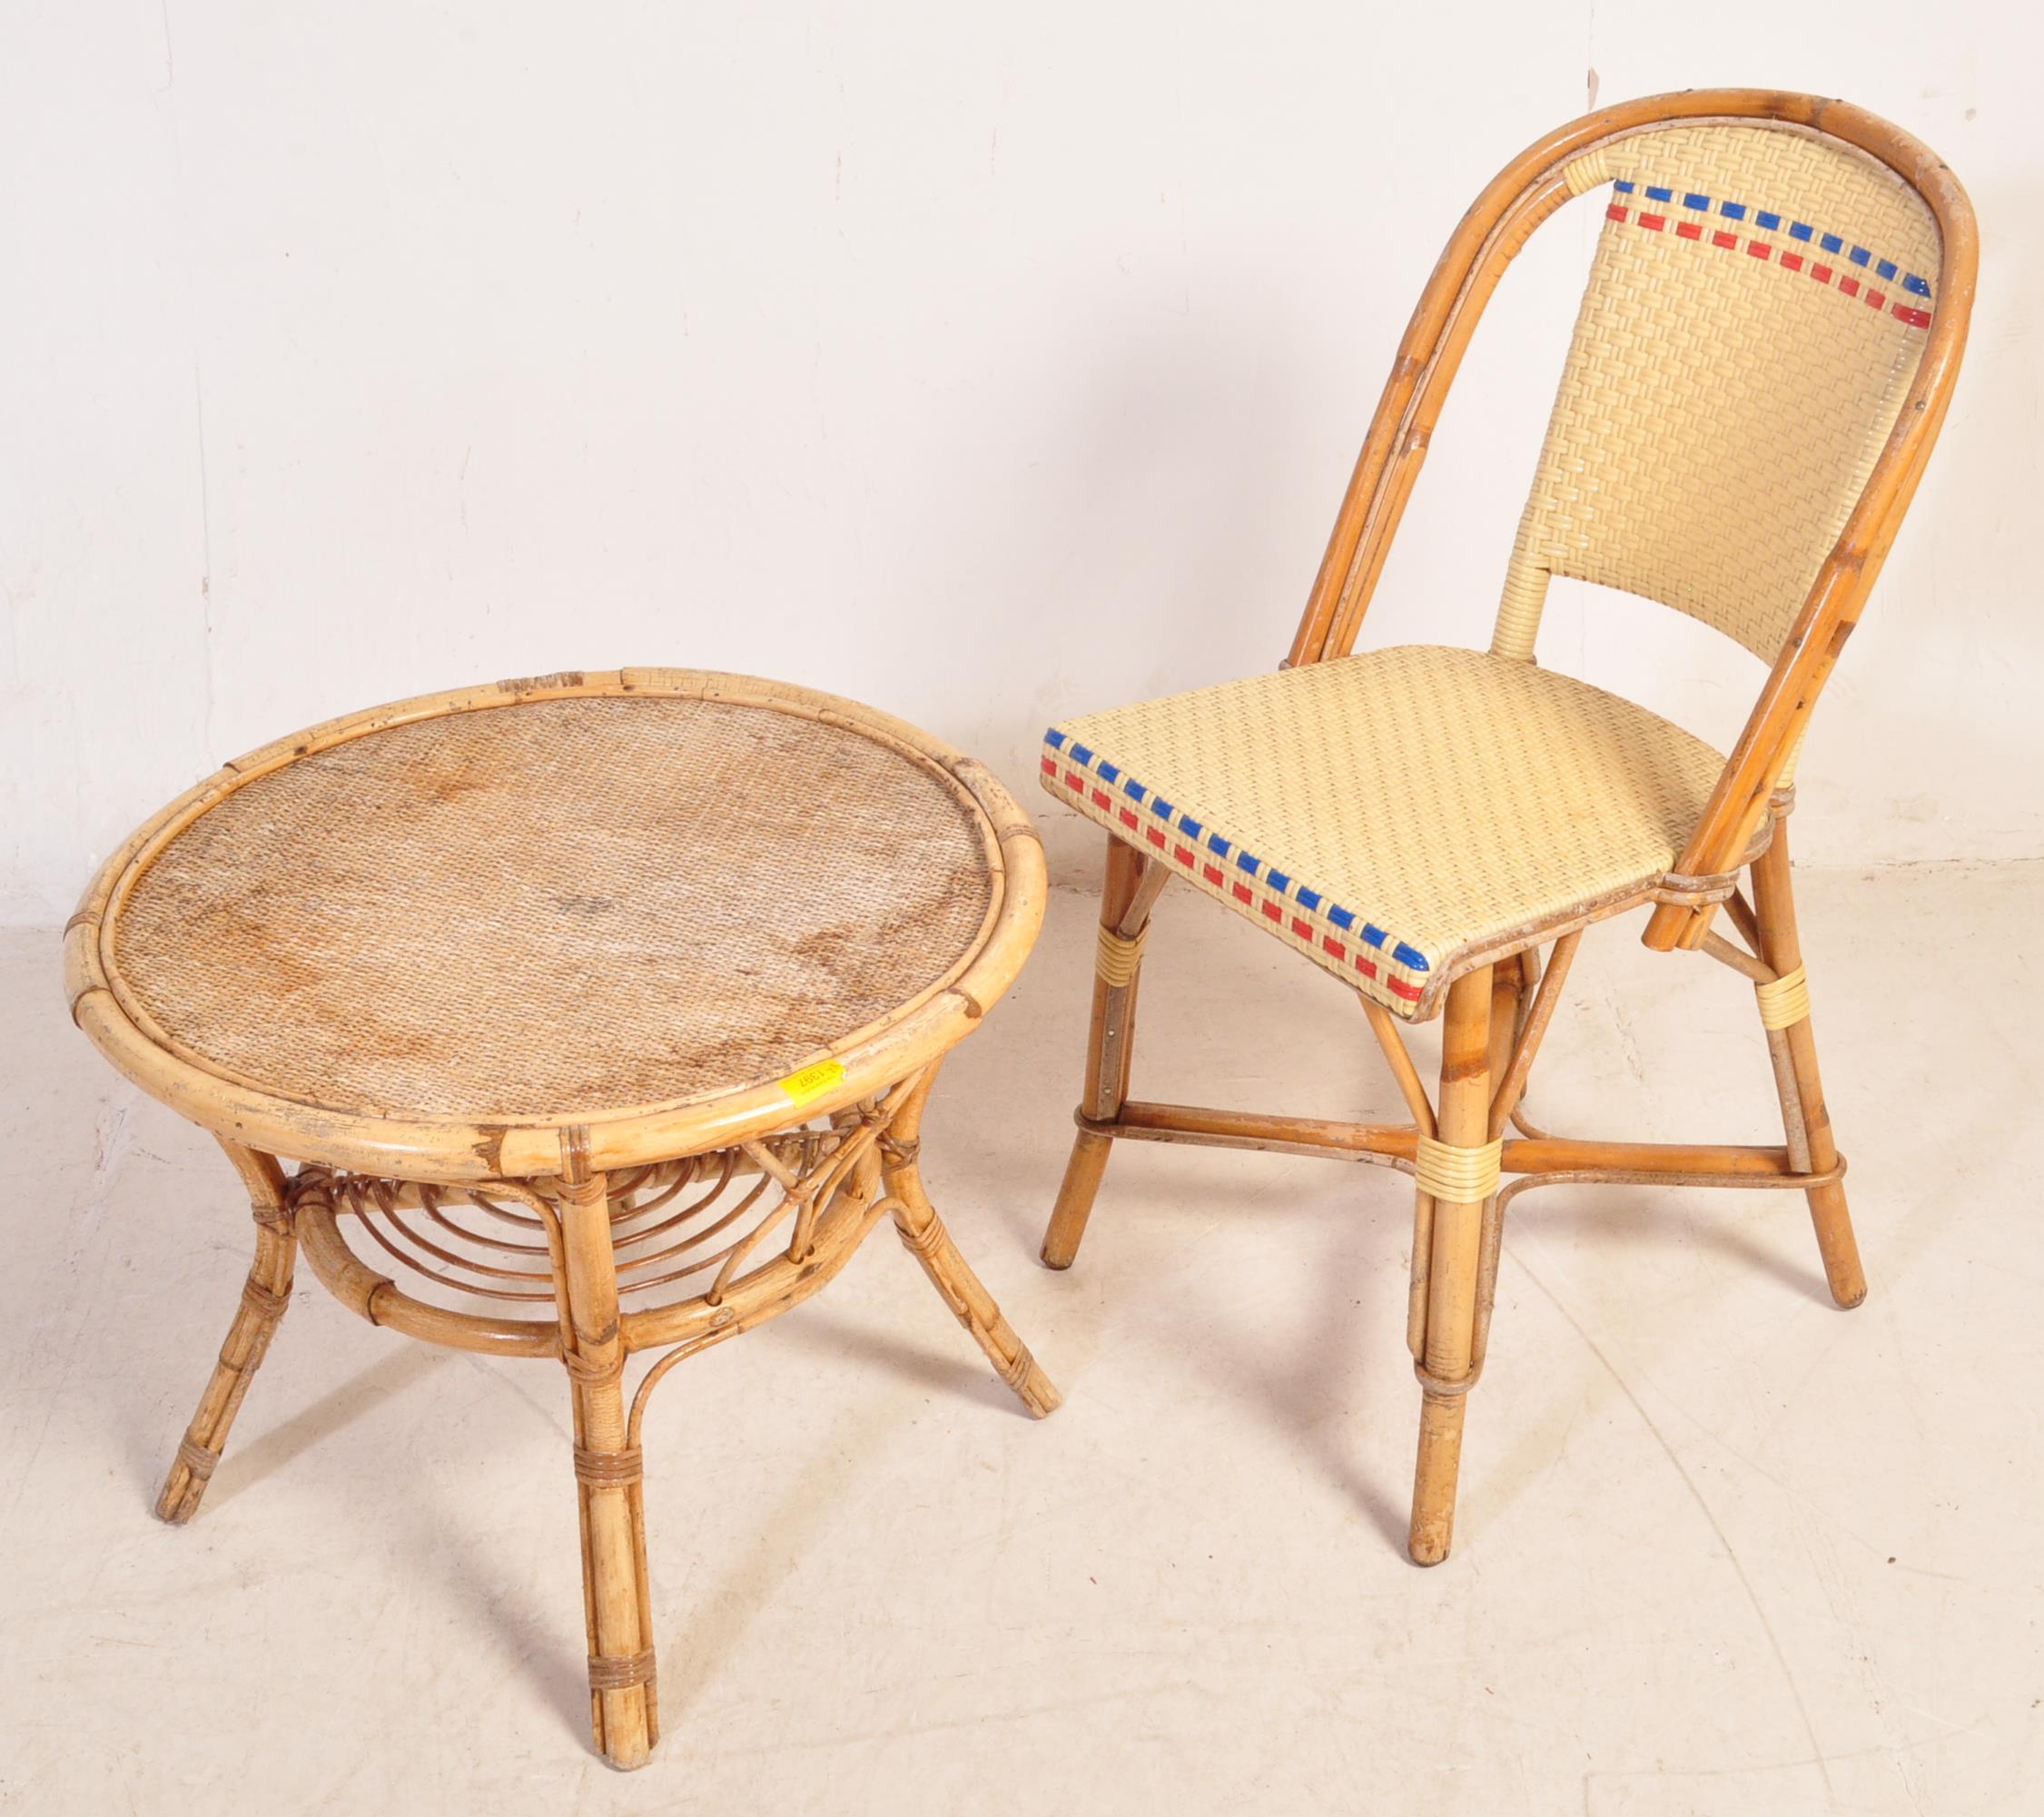 VINTAGE MID CENTURY BAMBOO TABLE & CHAIR - Image 2 of 8